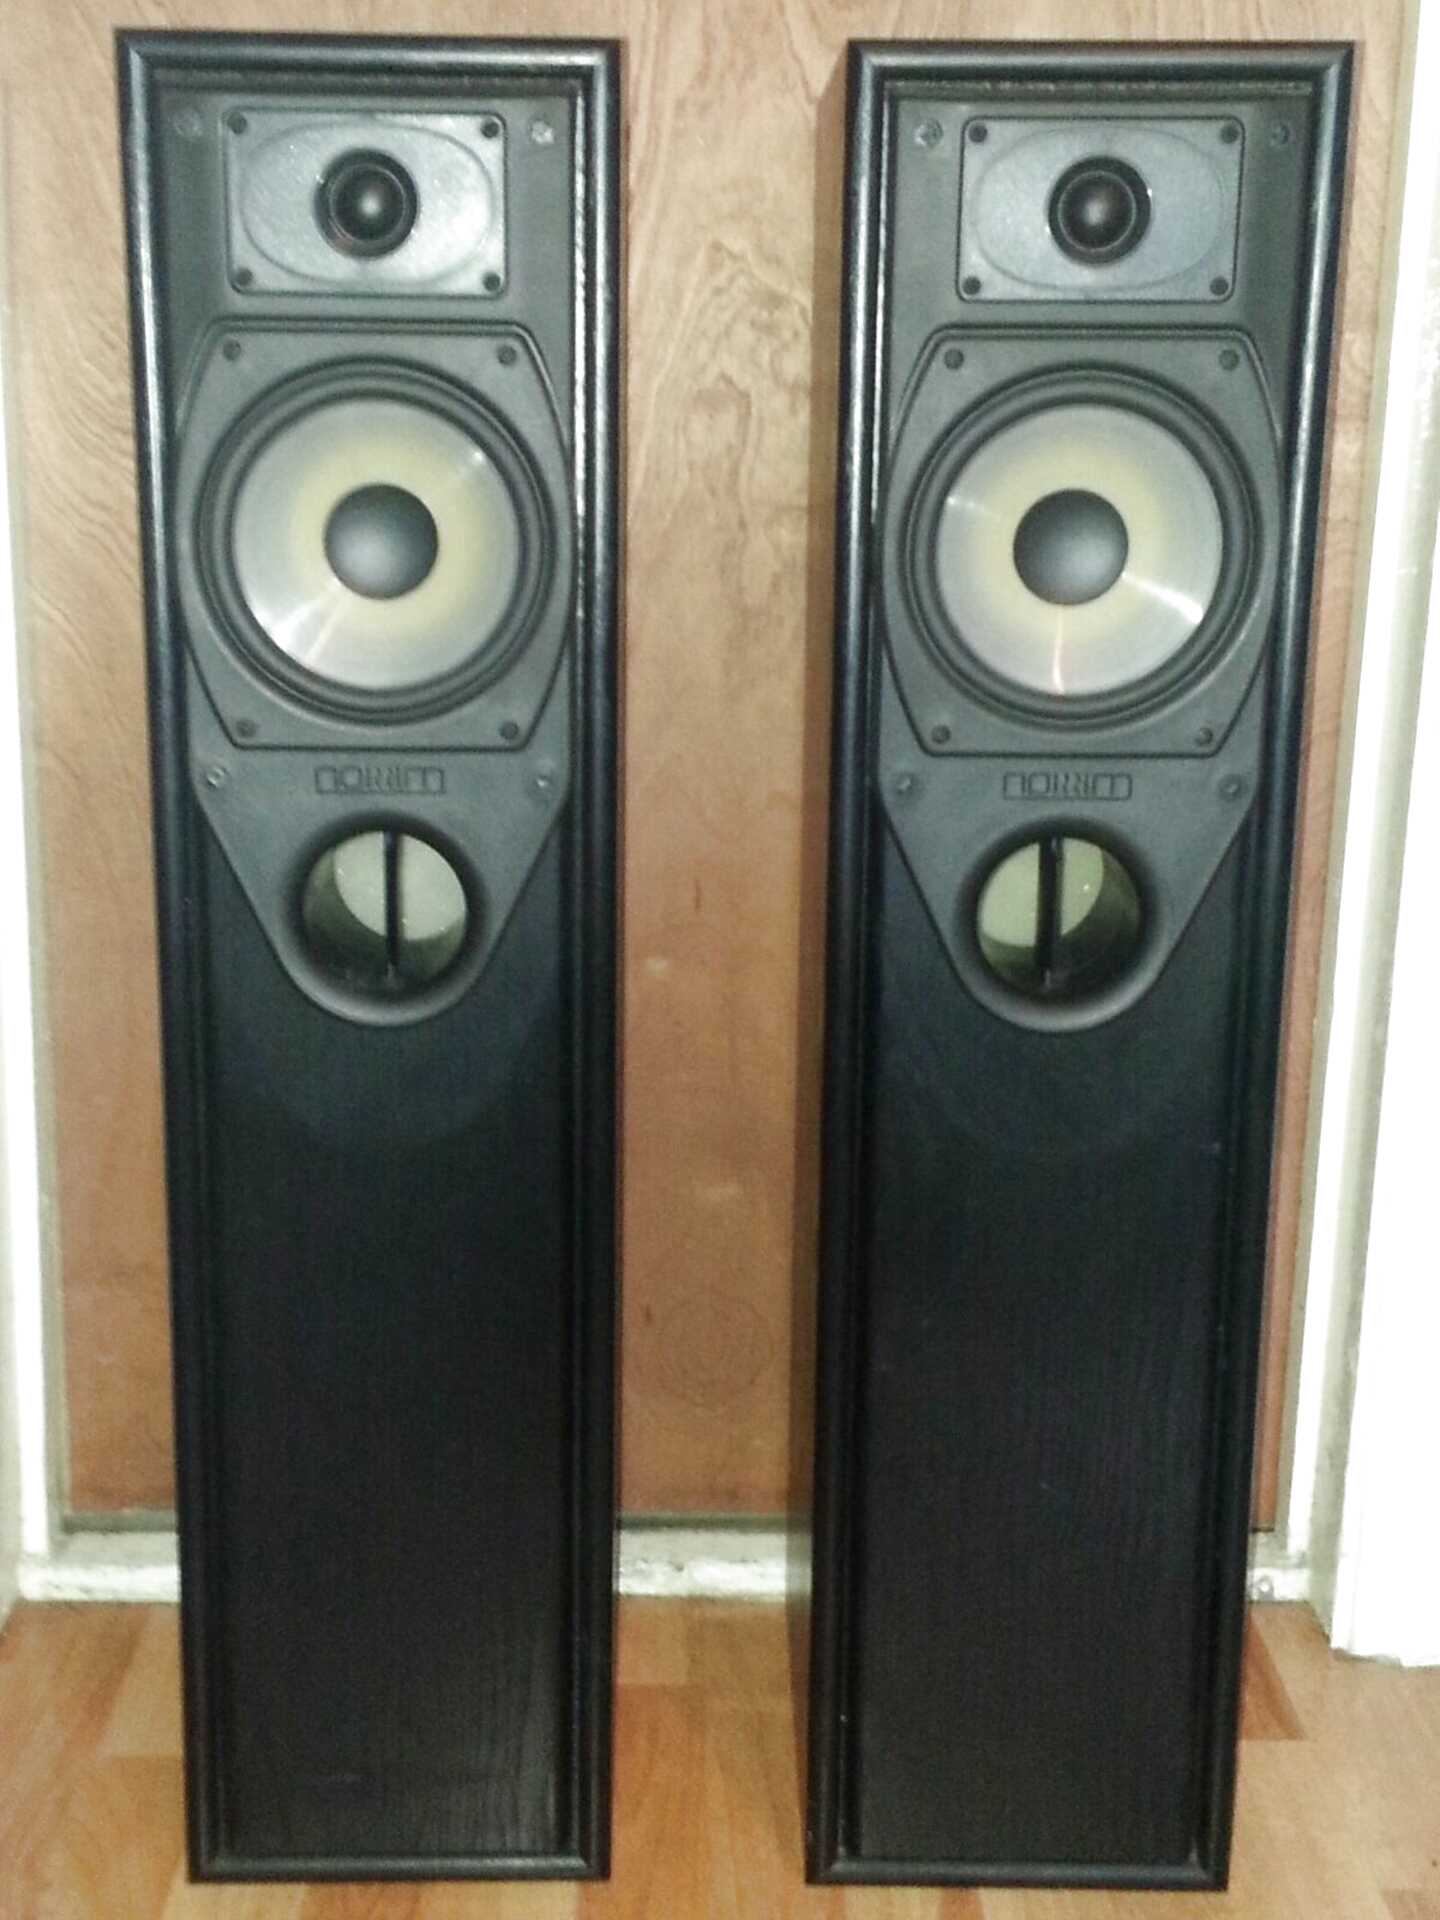 Mission Speakers 733 For Sale In Uk View 23 Bargains